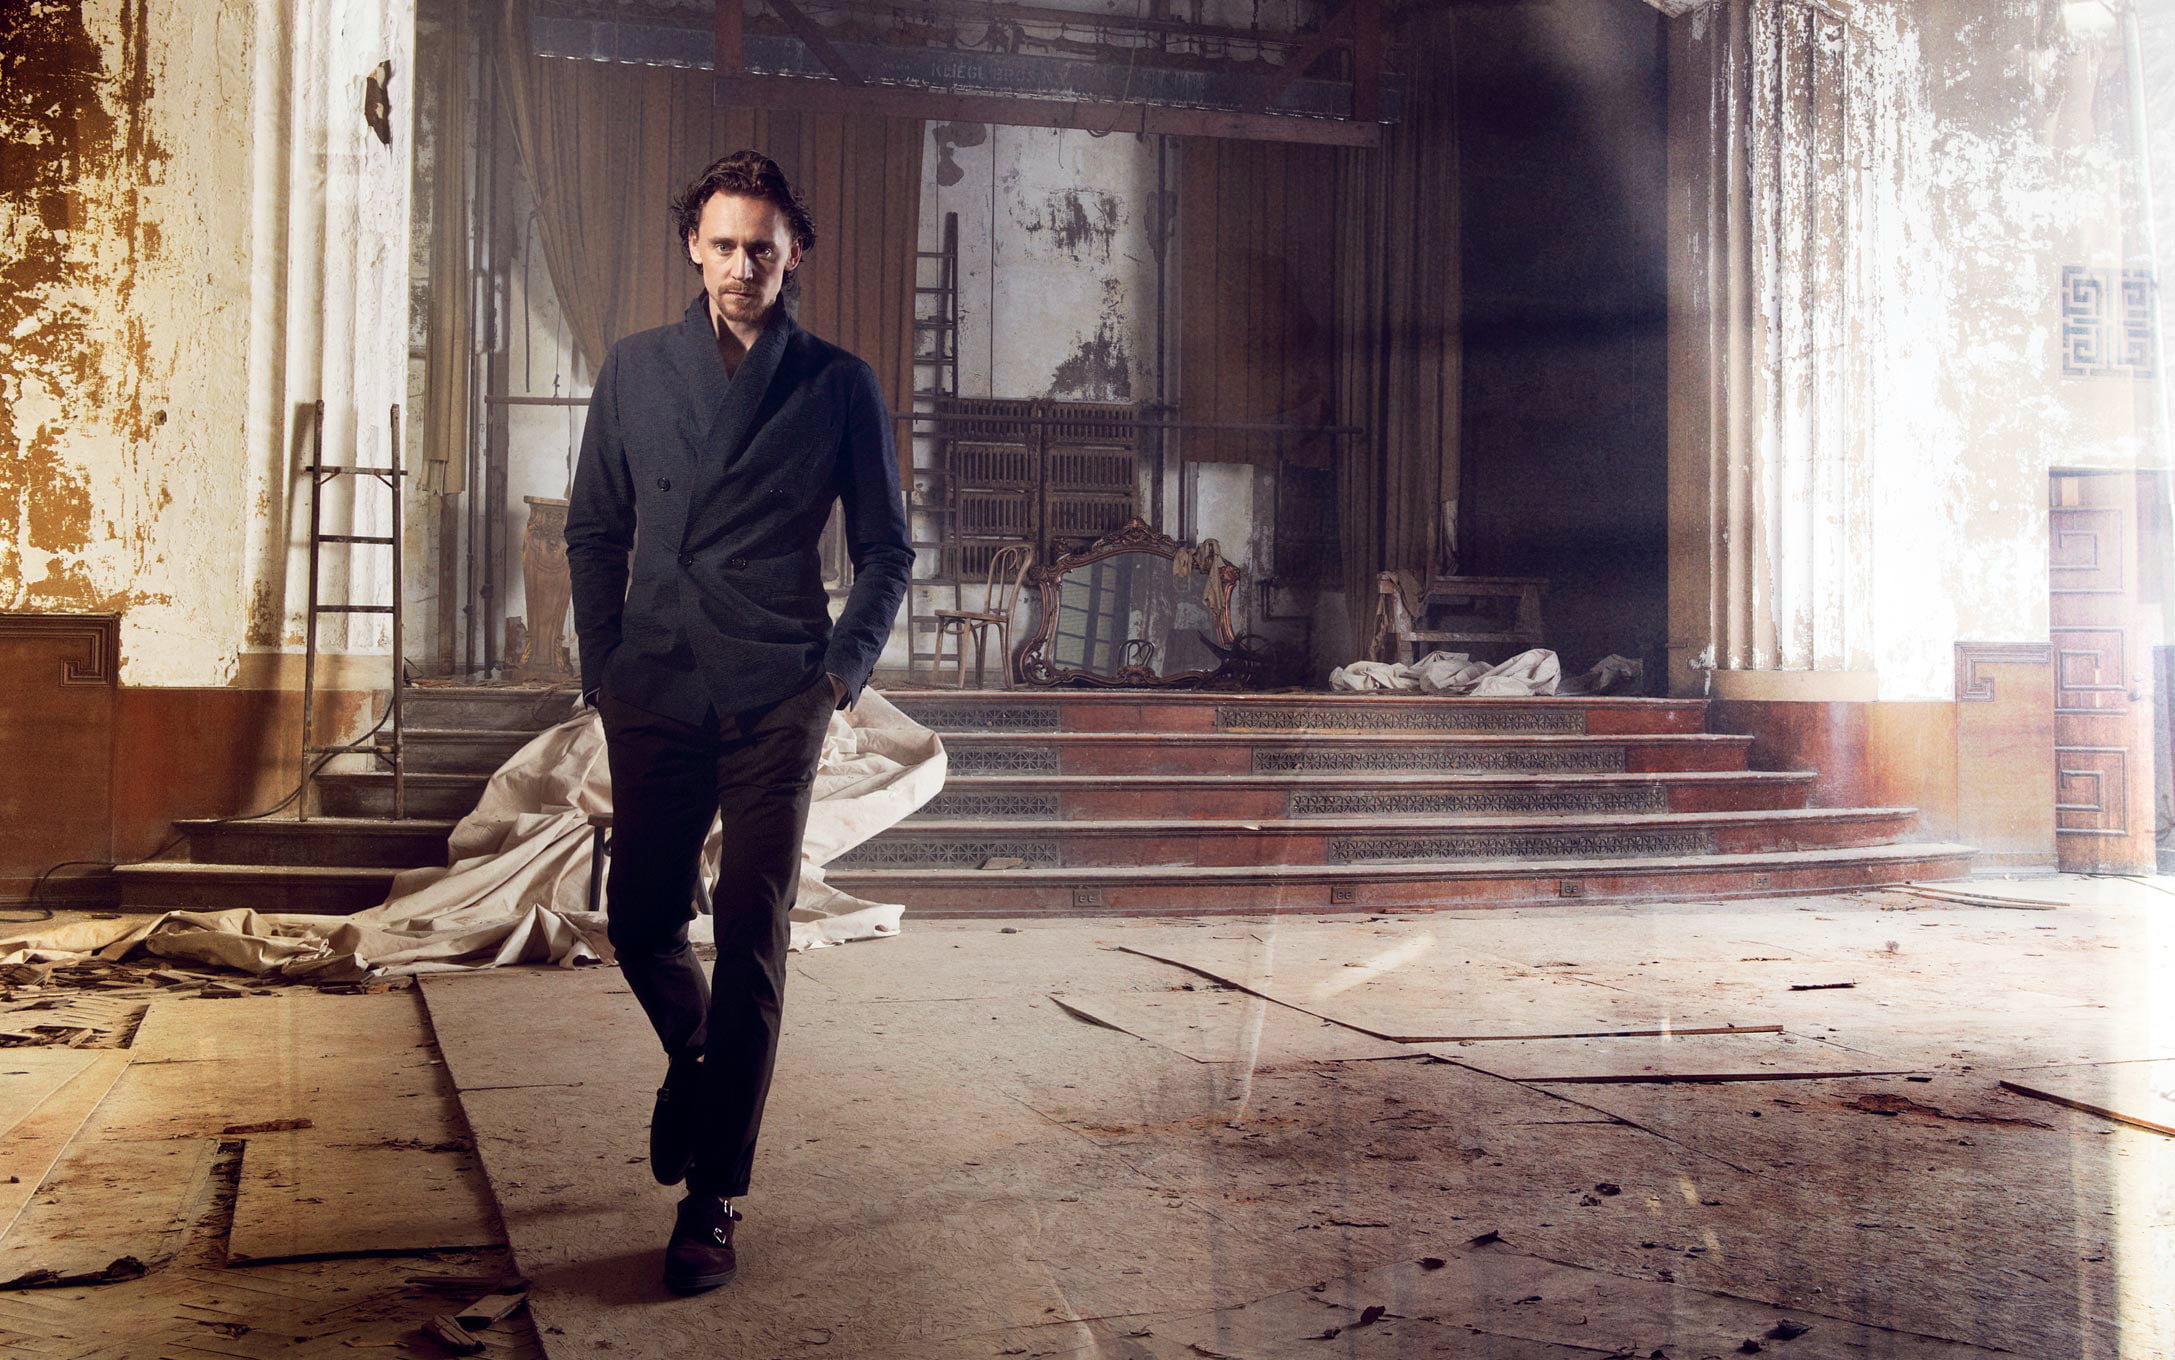 Tom Hiddleston, scene, actor, male, jacket, abandoned, one person